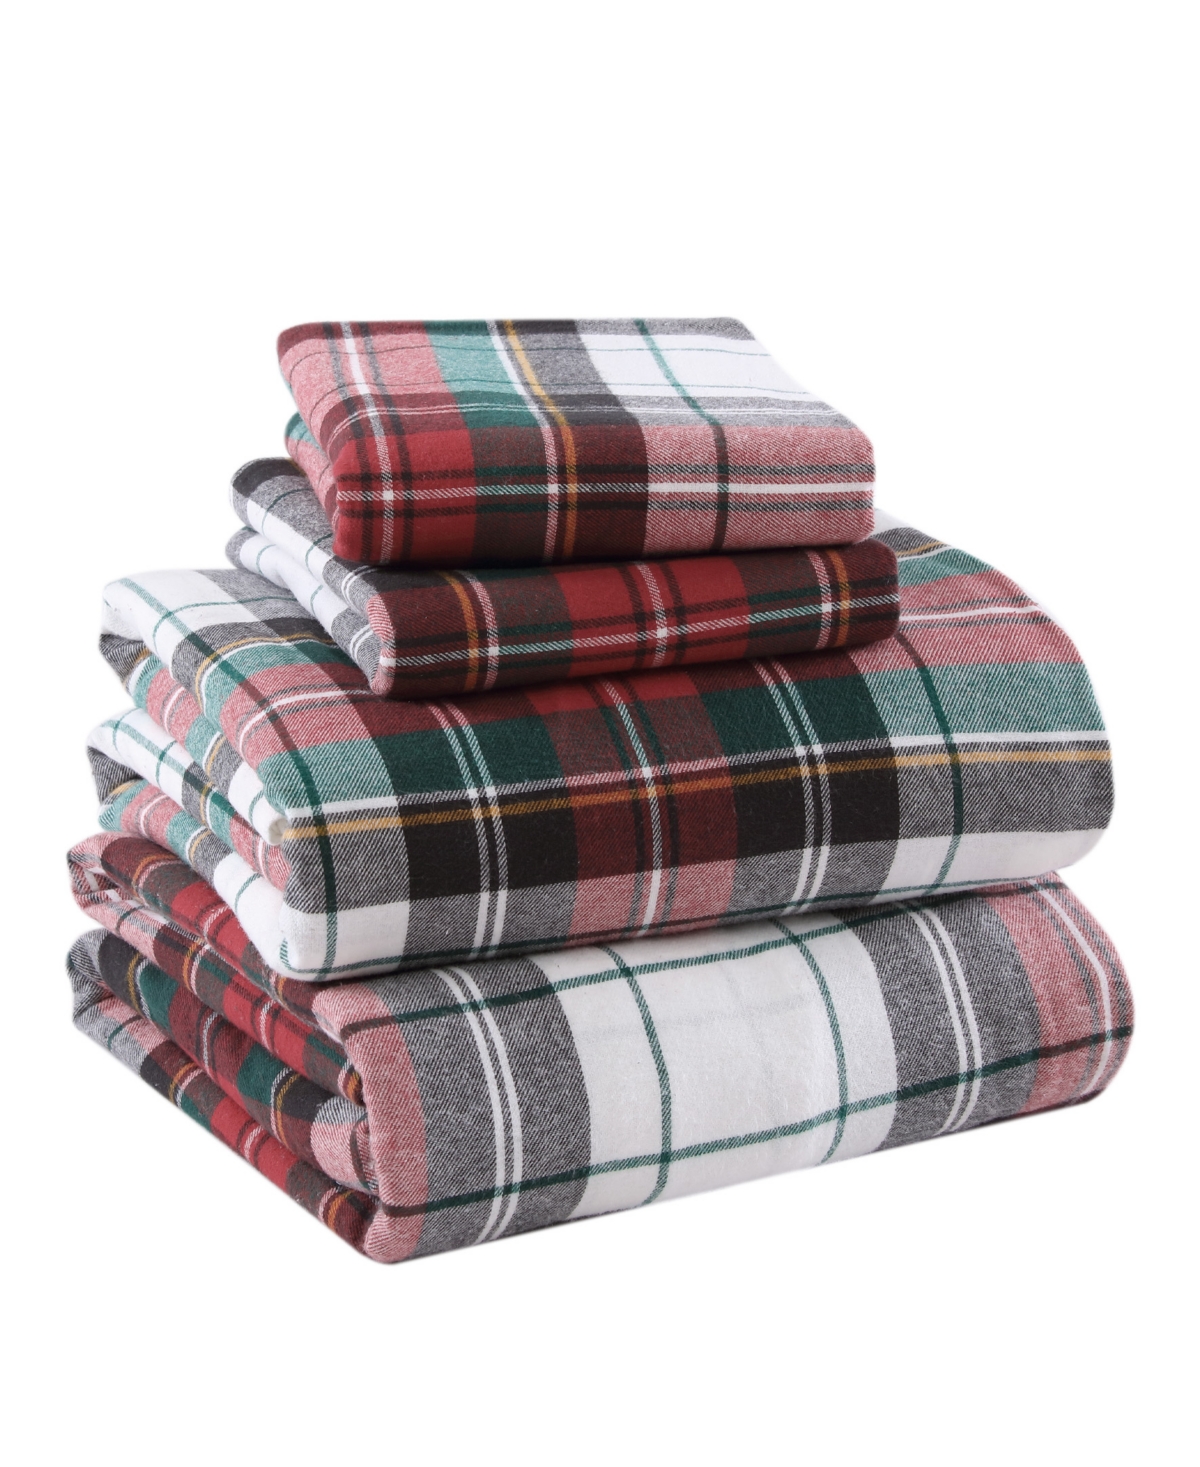 Levtex Spencer Red Plaid Reversible Quilt, King